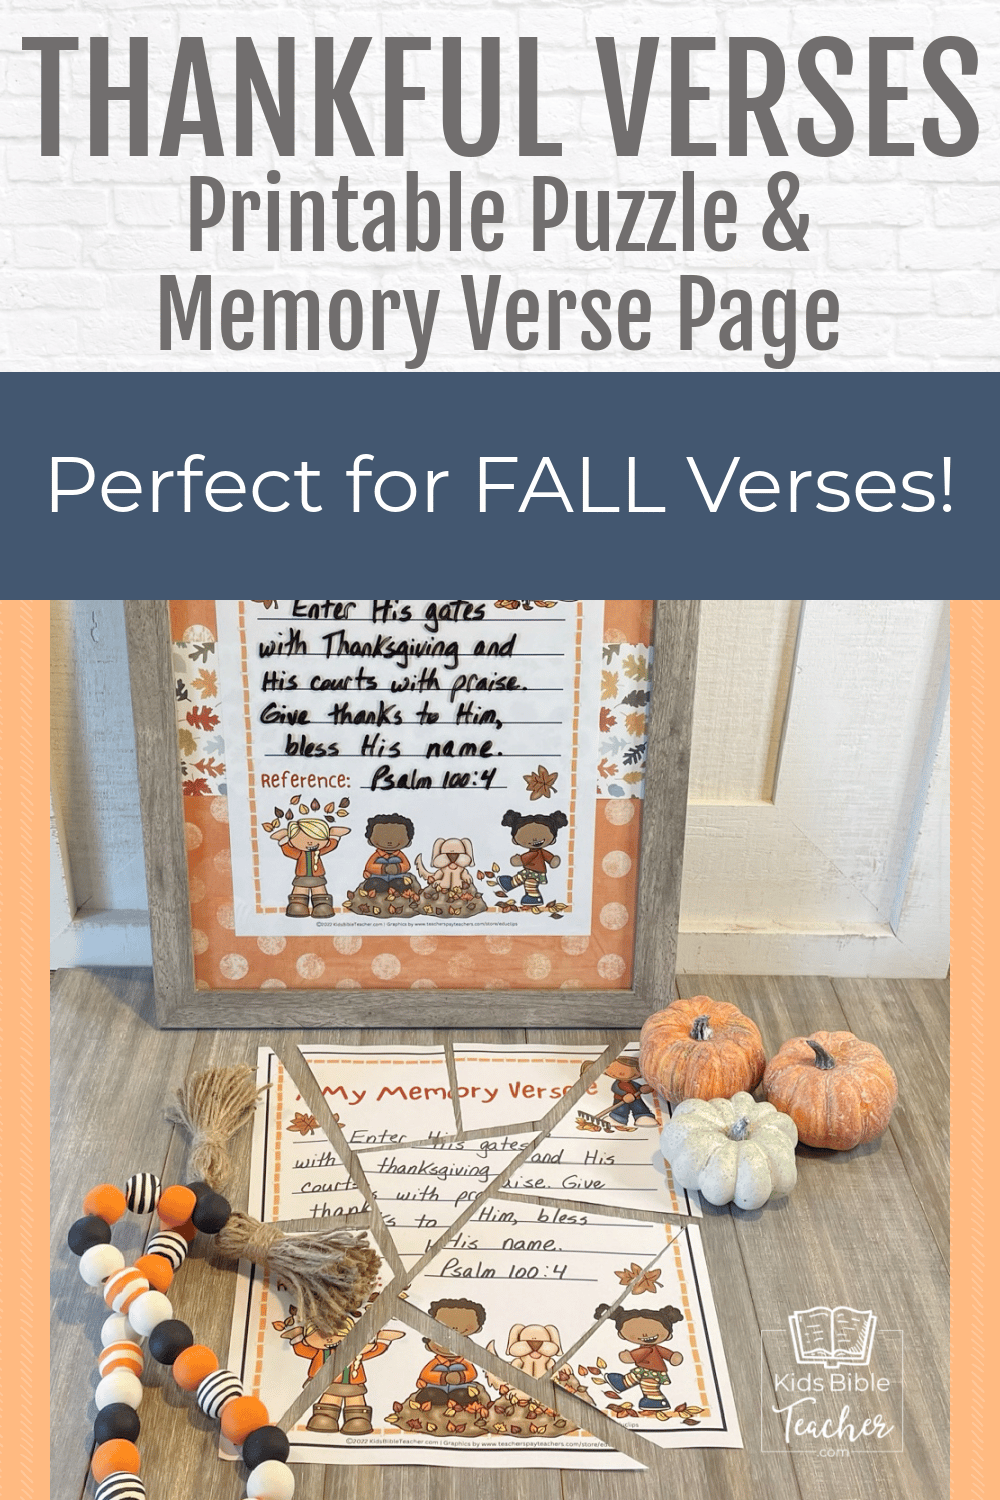 Help your kids memorize thankful verses this fall with a super fun printable Bible verse puzzle and Bible memory page!